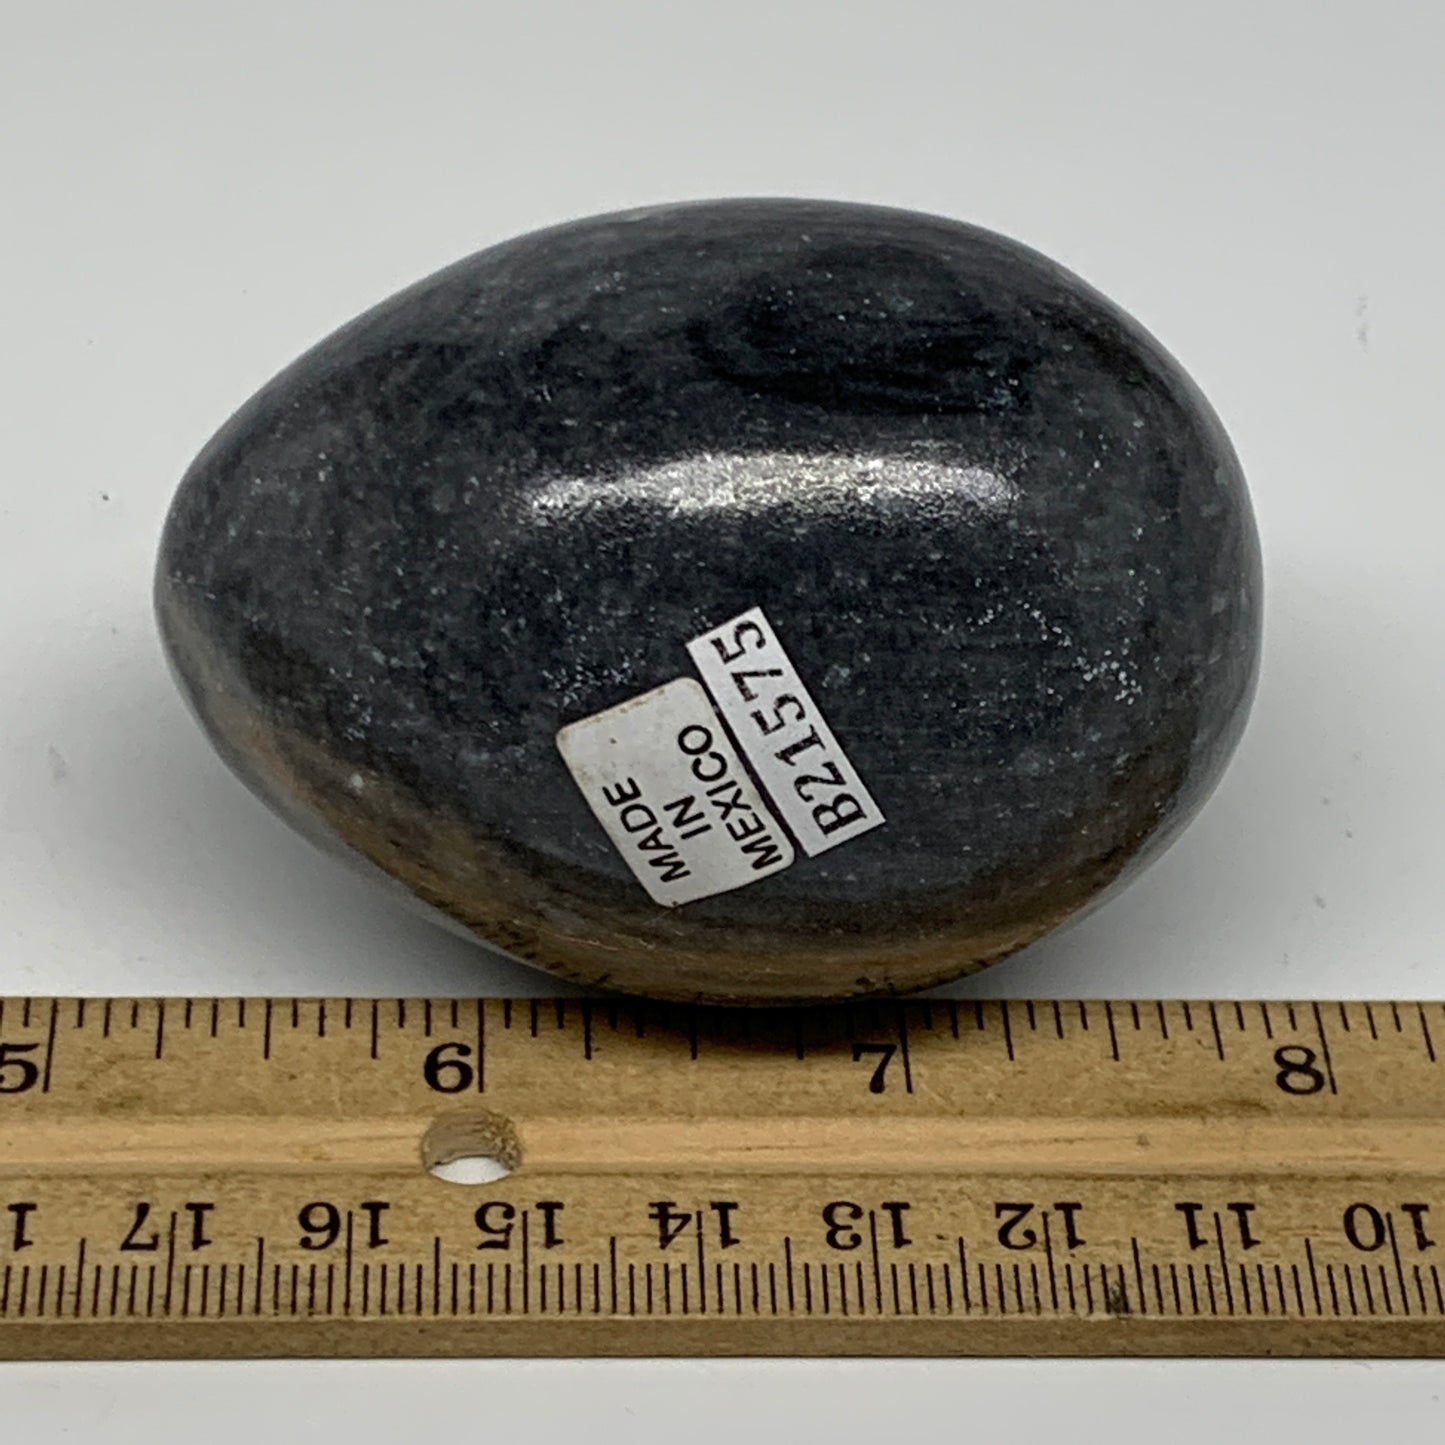 215.2g, 2.6"x1.9" Natural Gray Onyx Egg Gemstone Mineral, from Mexico, B21575